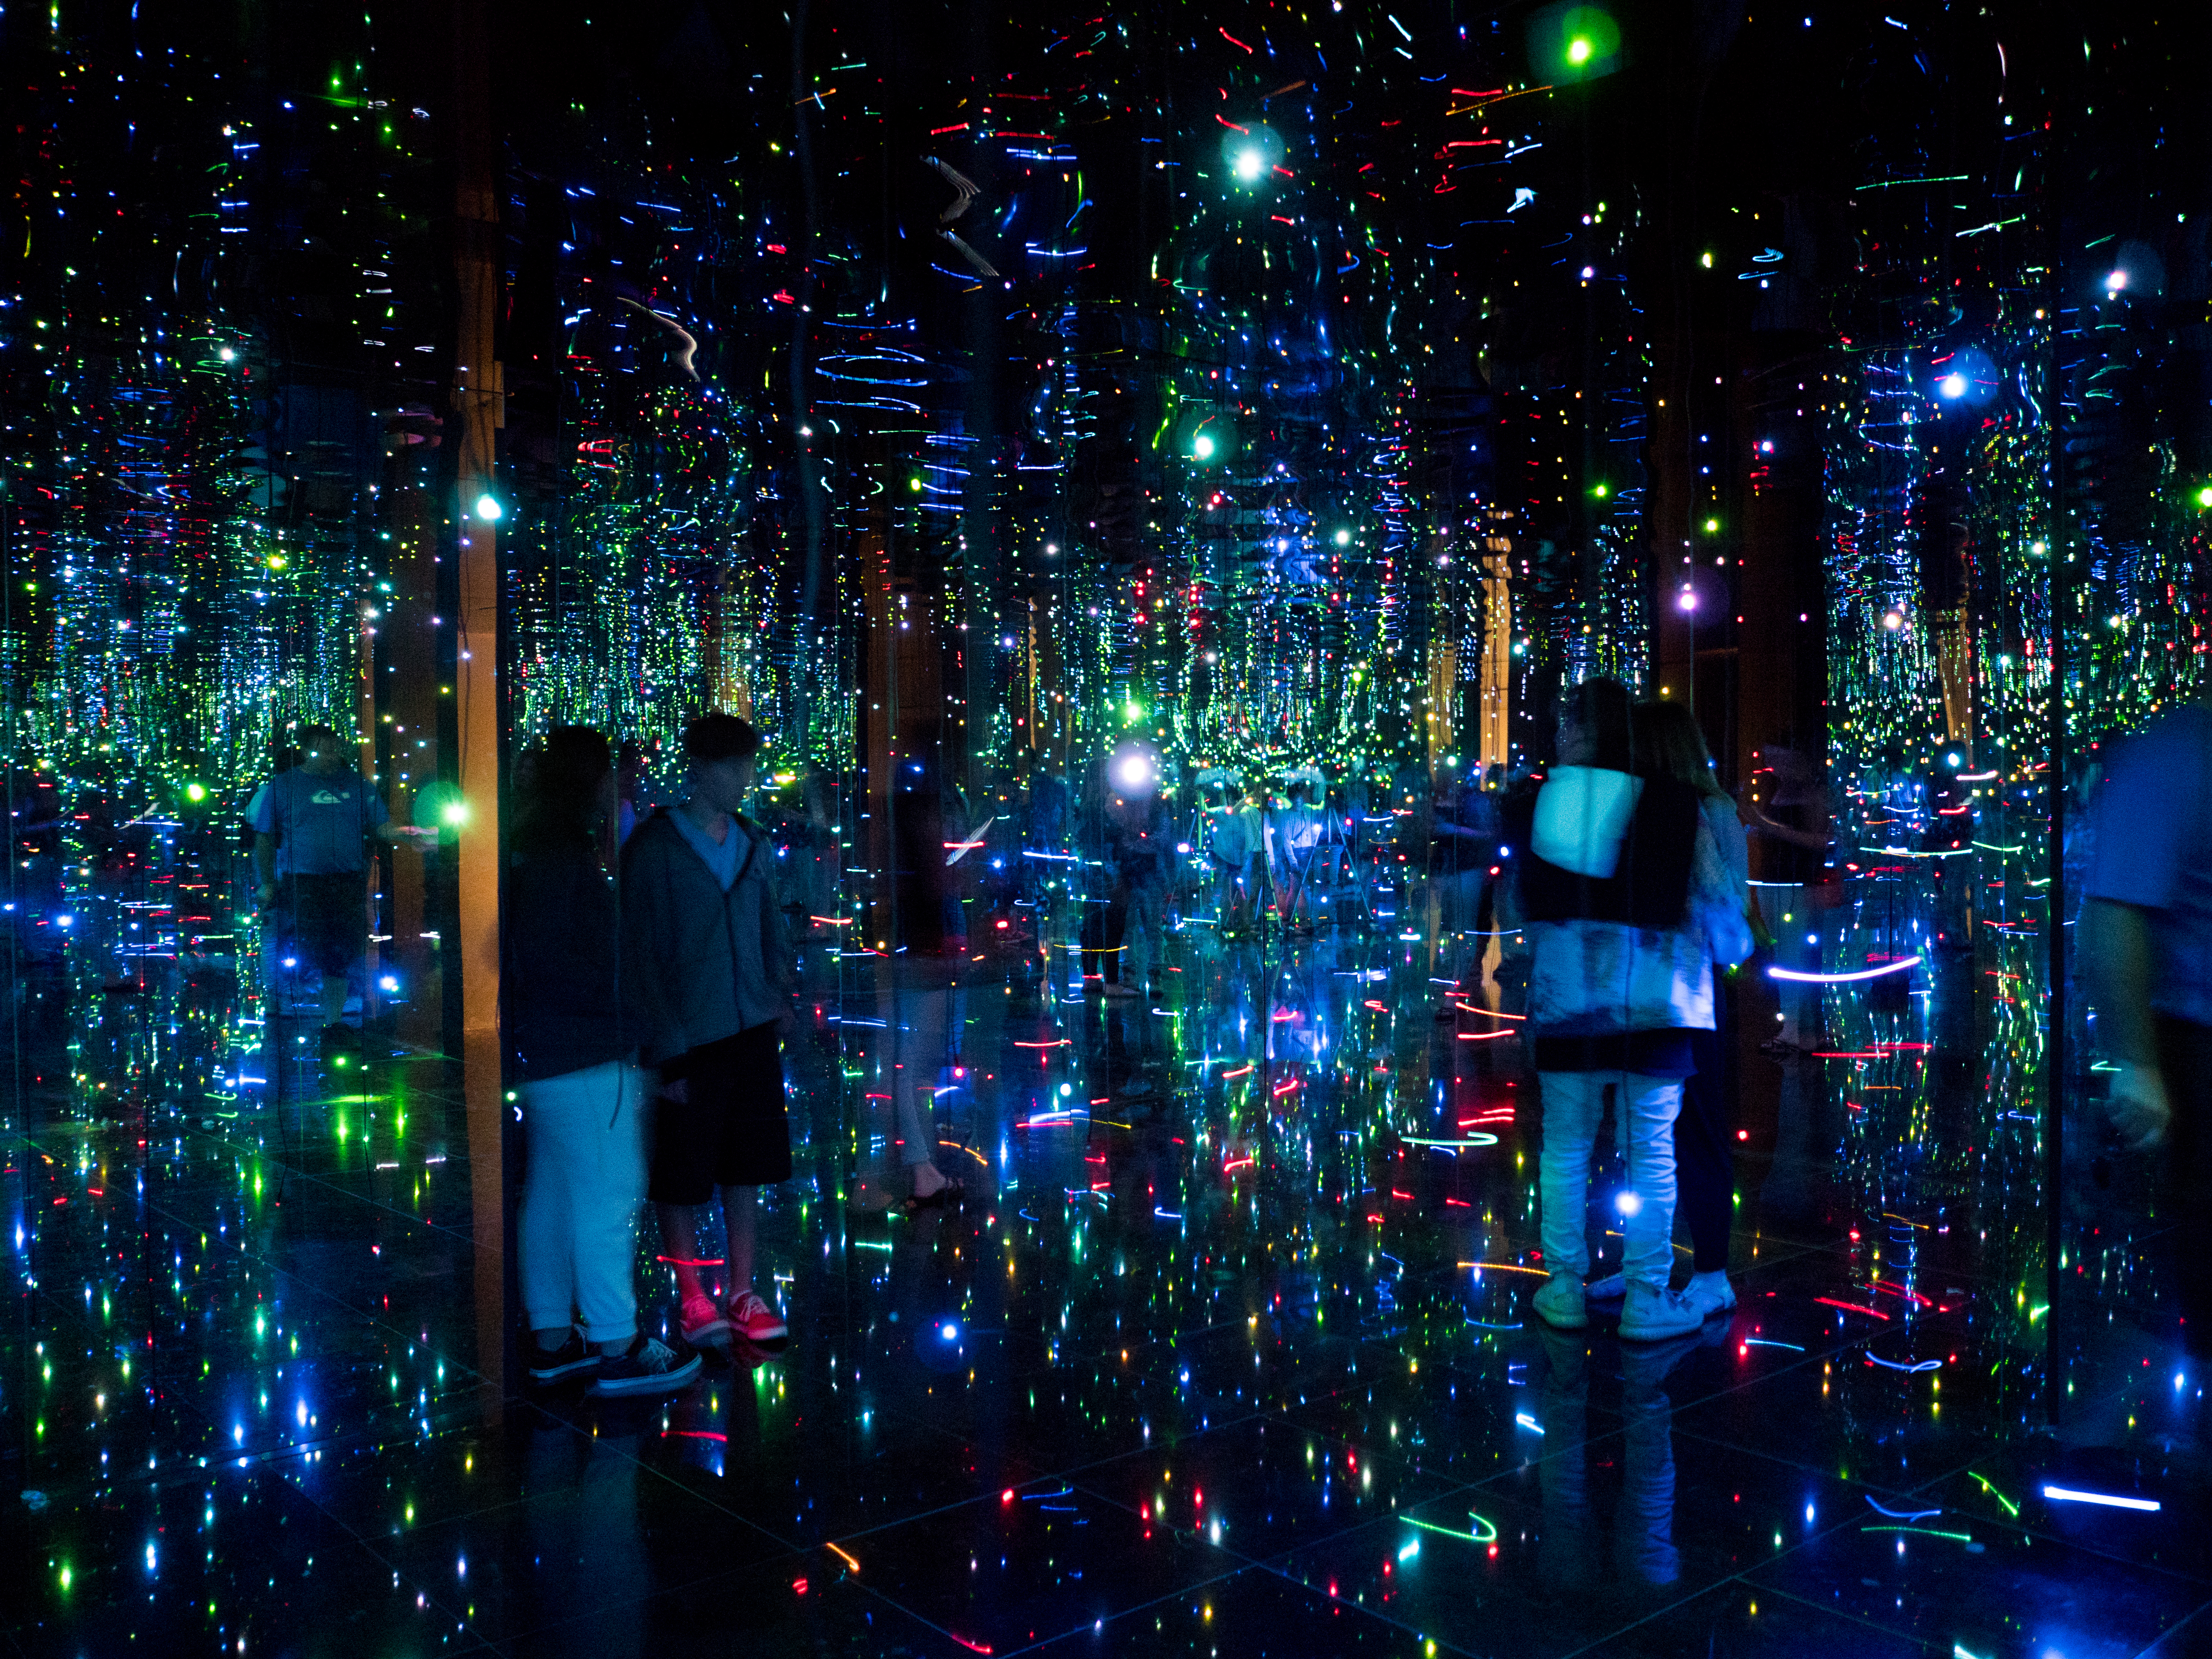 Yayoi Kusama, You Who are Getting Obliterated in the Dancing Swarm of Fireflies (Tú que estás siendo obliterado por una multitud de luciérnagas danzantes), 2005, mixed media installation with LED lights, Museum purchase with funds provided by Jan and Howard Hendler.